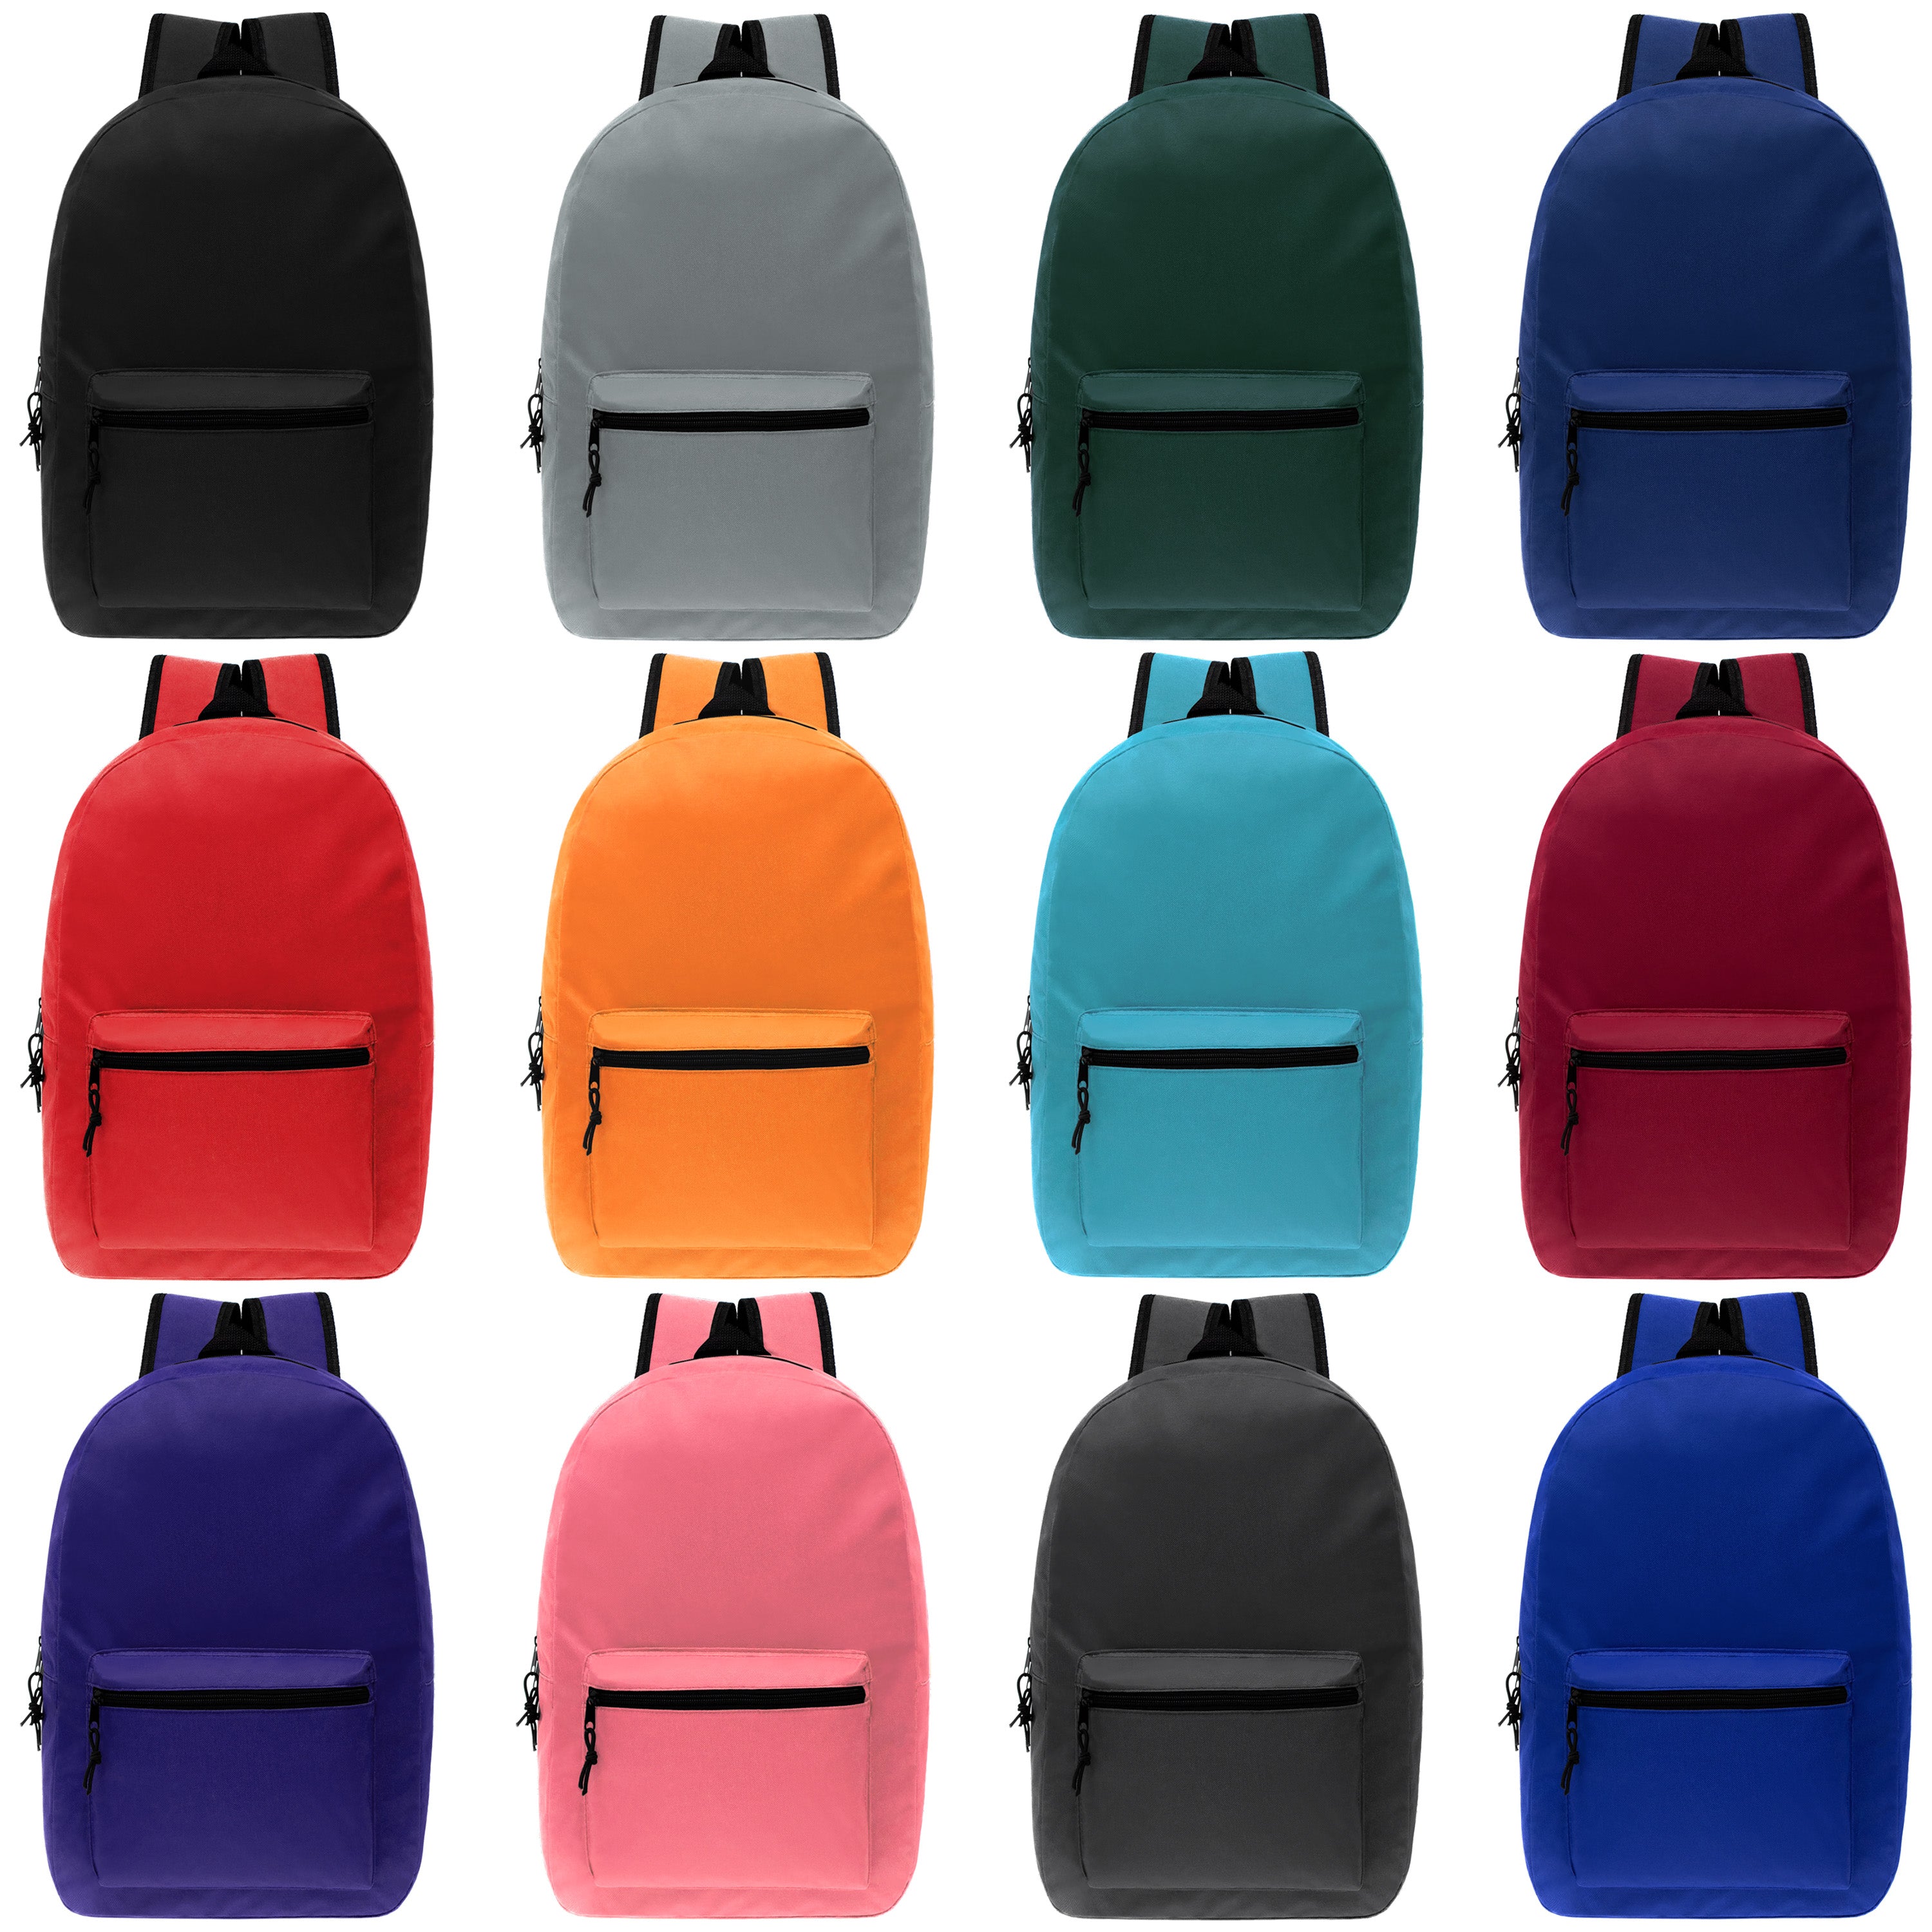 19" Bulk Backpacks in 12 Assorted Colors with 52 Piece School Supply Kits - Case of 12 Value, Bundle Pack